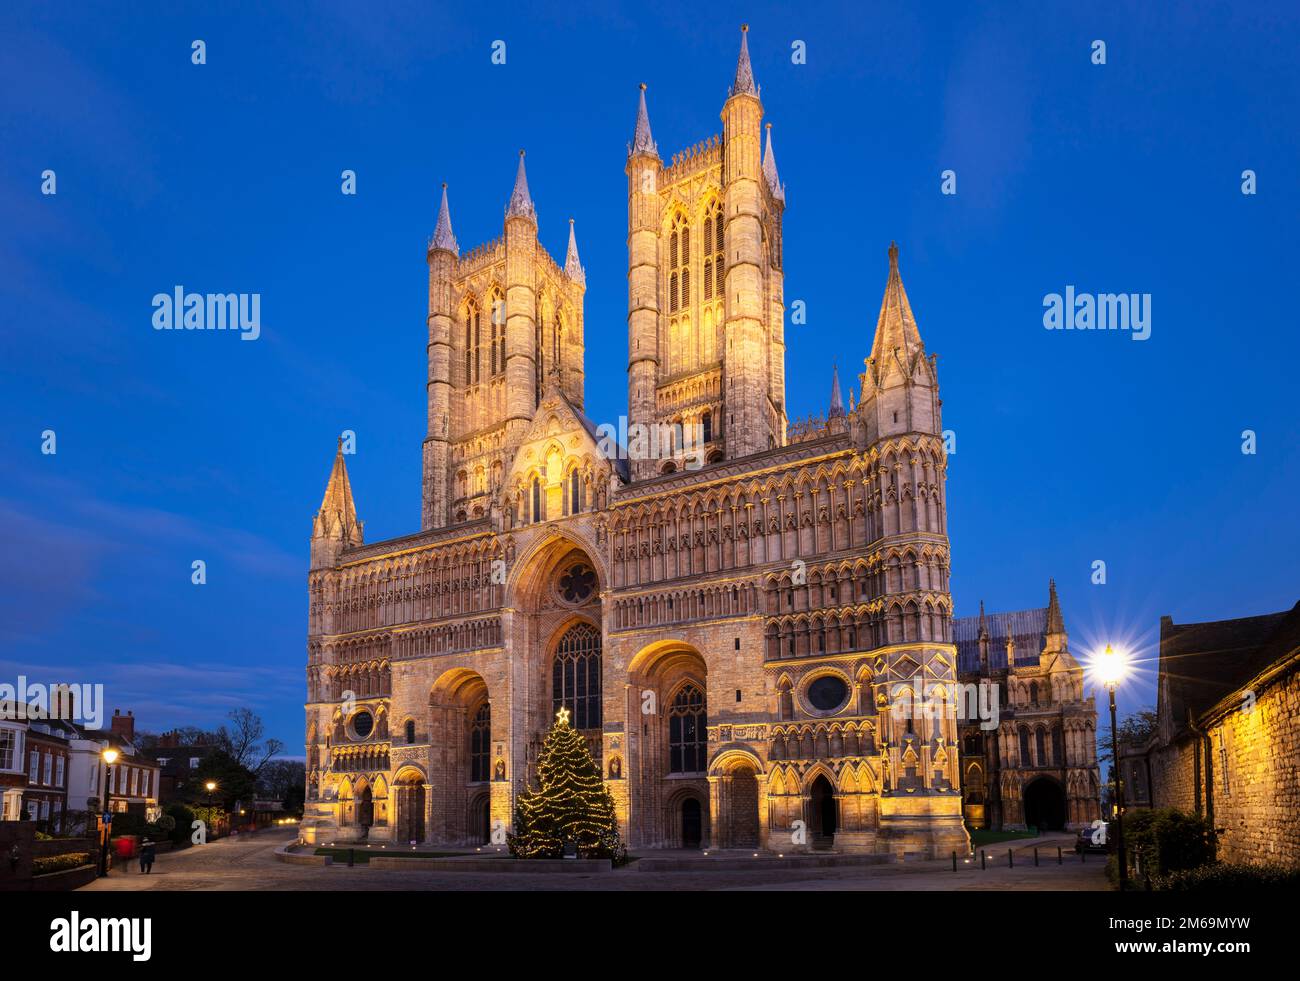 Lincoln Cathedral Lincoln Minster West Front lit up at night Minster Yard Lincoln cathedral uk lincoln uk Lincoln Lincolnshire England UK GB Europe Stock Photo